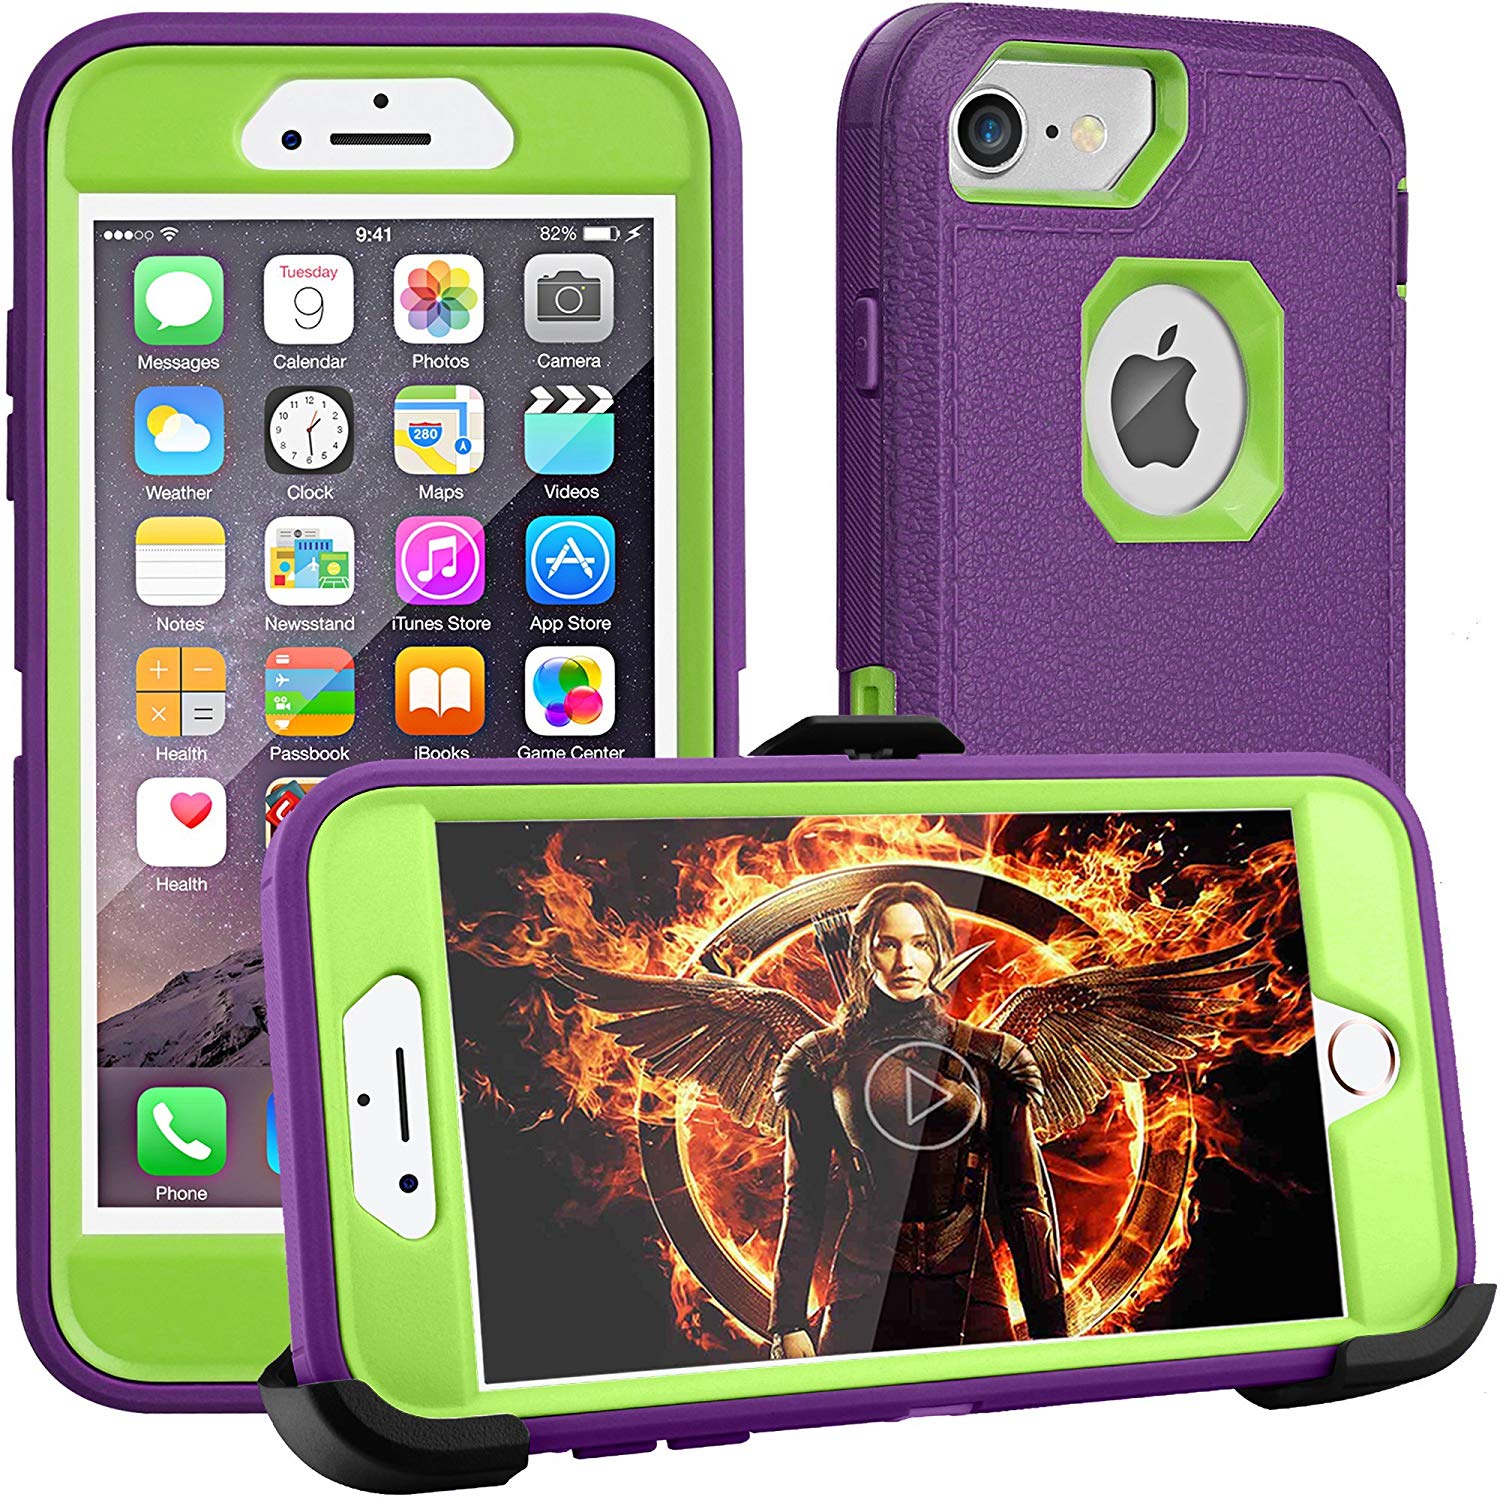 iPhone 8 case,iPhone 7 Case, iPhone 6s Case, FOGEEK [Dust-Proof] Belt-Clip Heavy Duty Kickstand Cover [Shockproof] PC+TPU Shell for Apple iPhone 7 and iPhone 6/6s (Purple and Green)